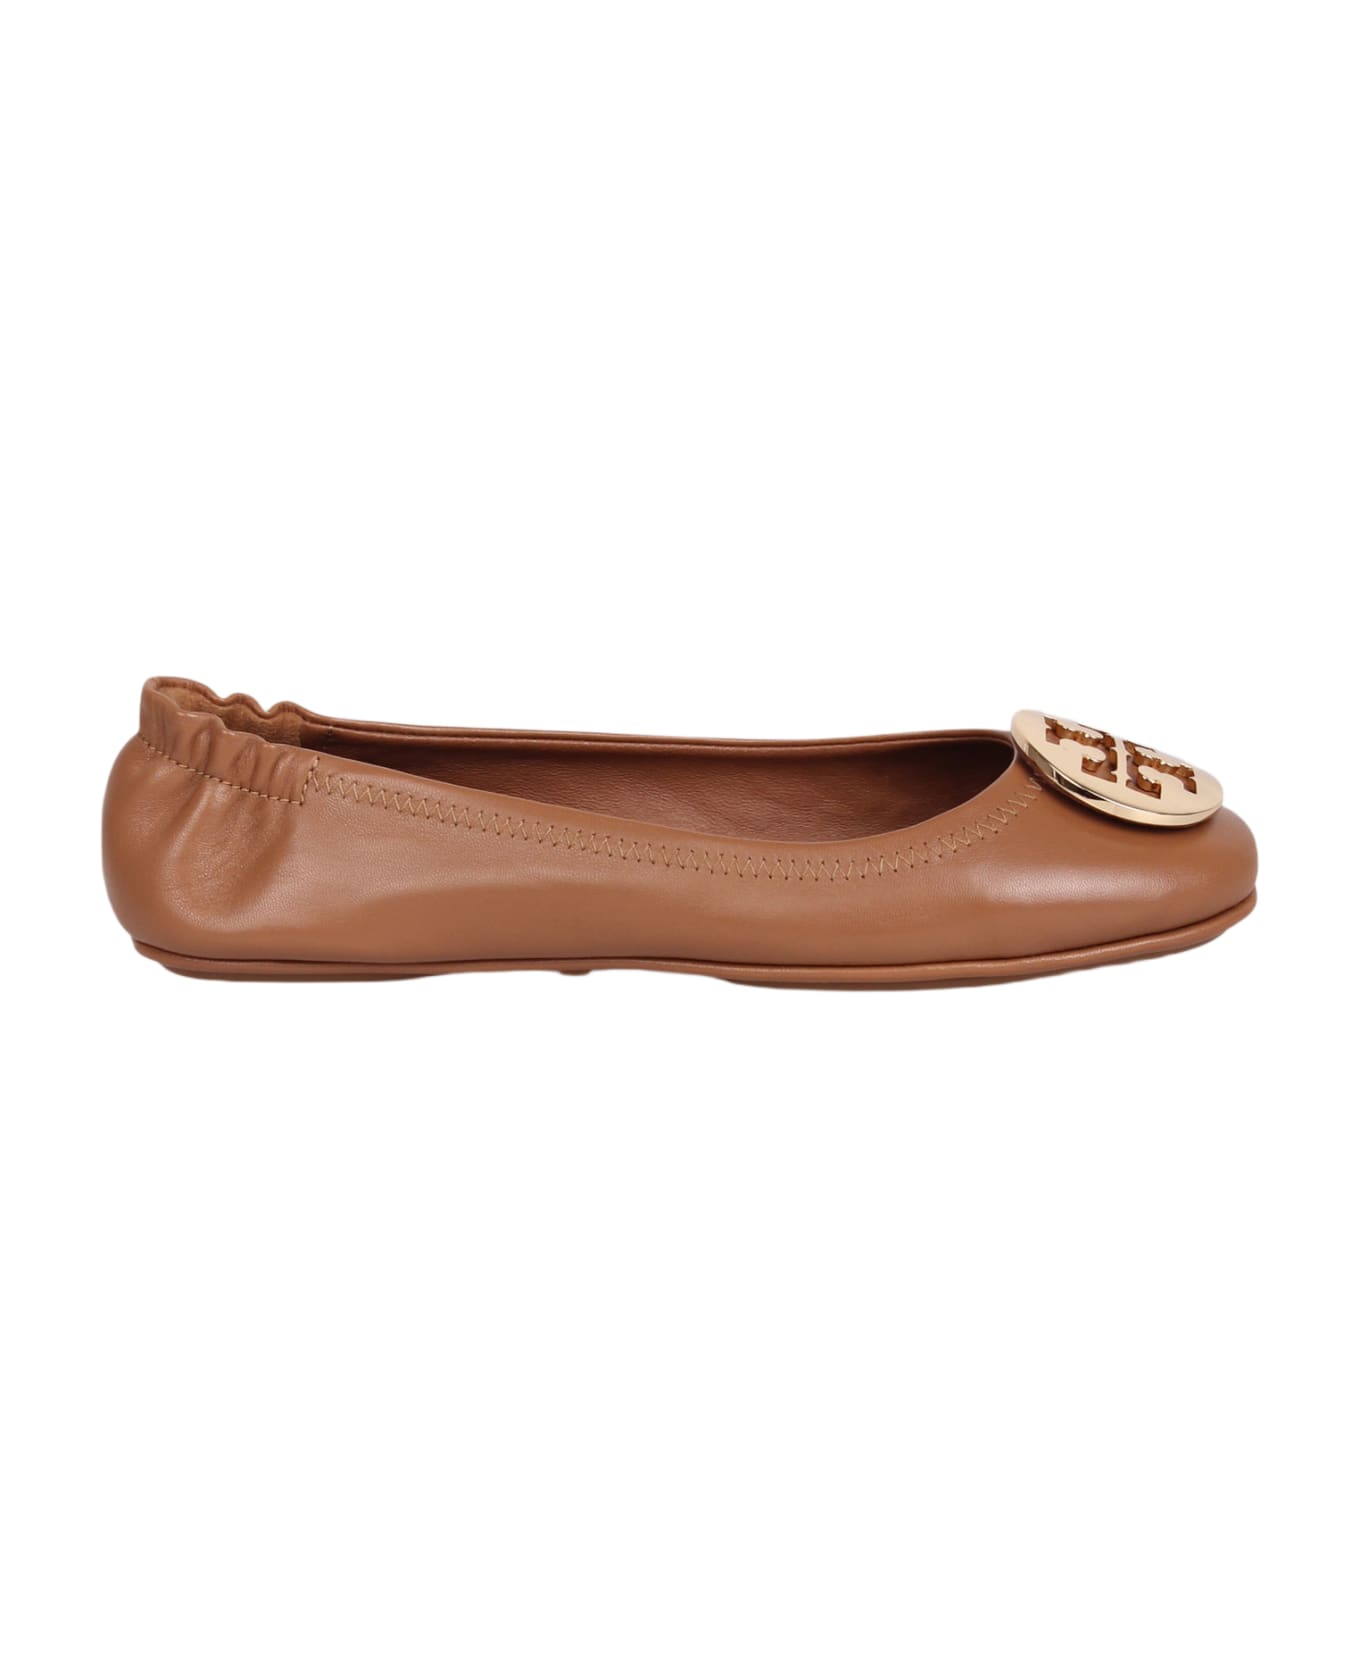 Tory Burch Minnie Ballerinas With Application